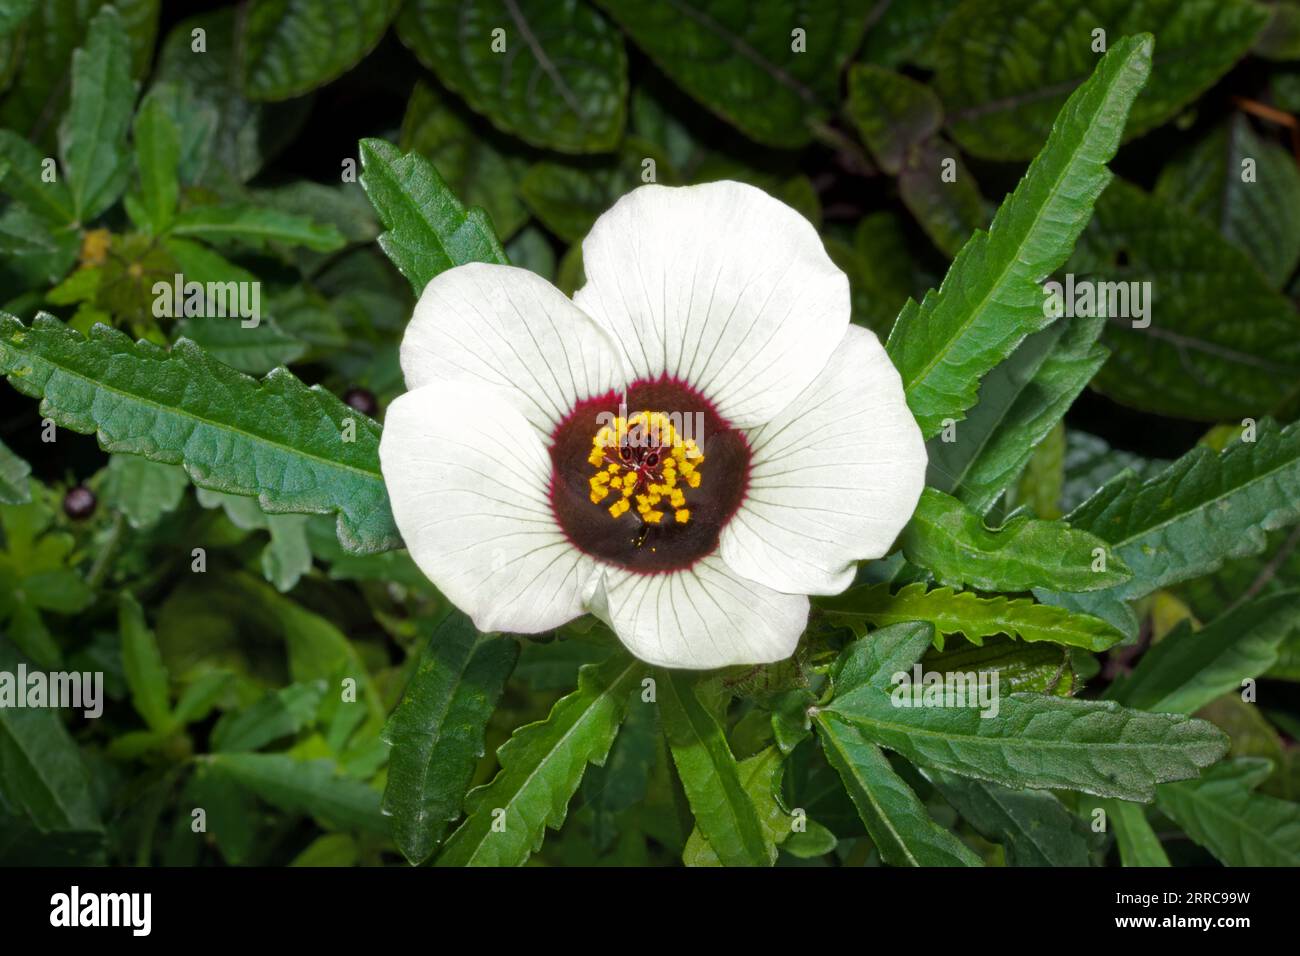 Hibiscus trionum (flower-of-an-hour) is native to the Old World tropics and subtropics. It is now commonly cultivated as a garden plant. Stock Photo